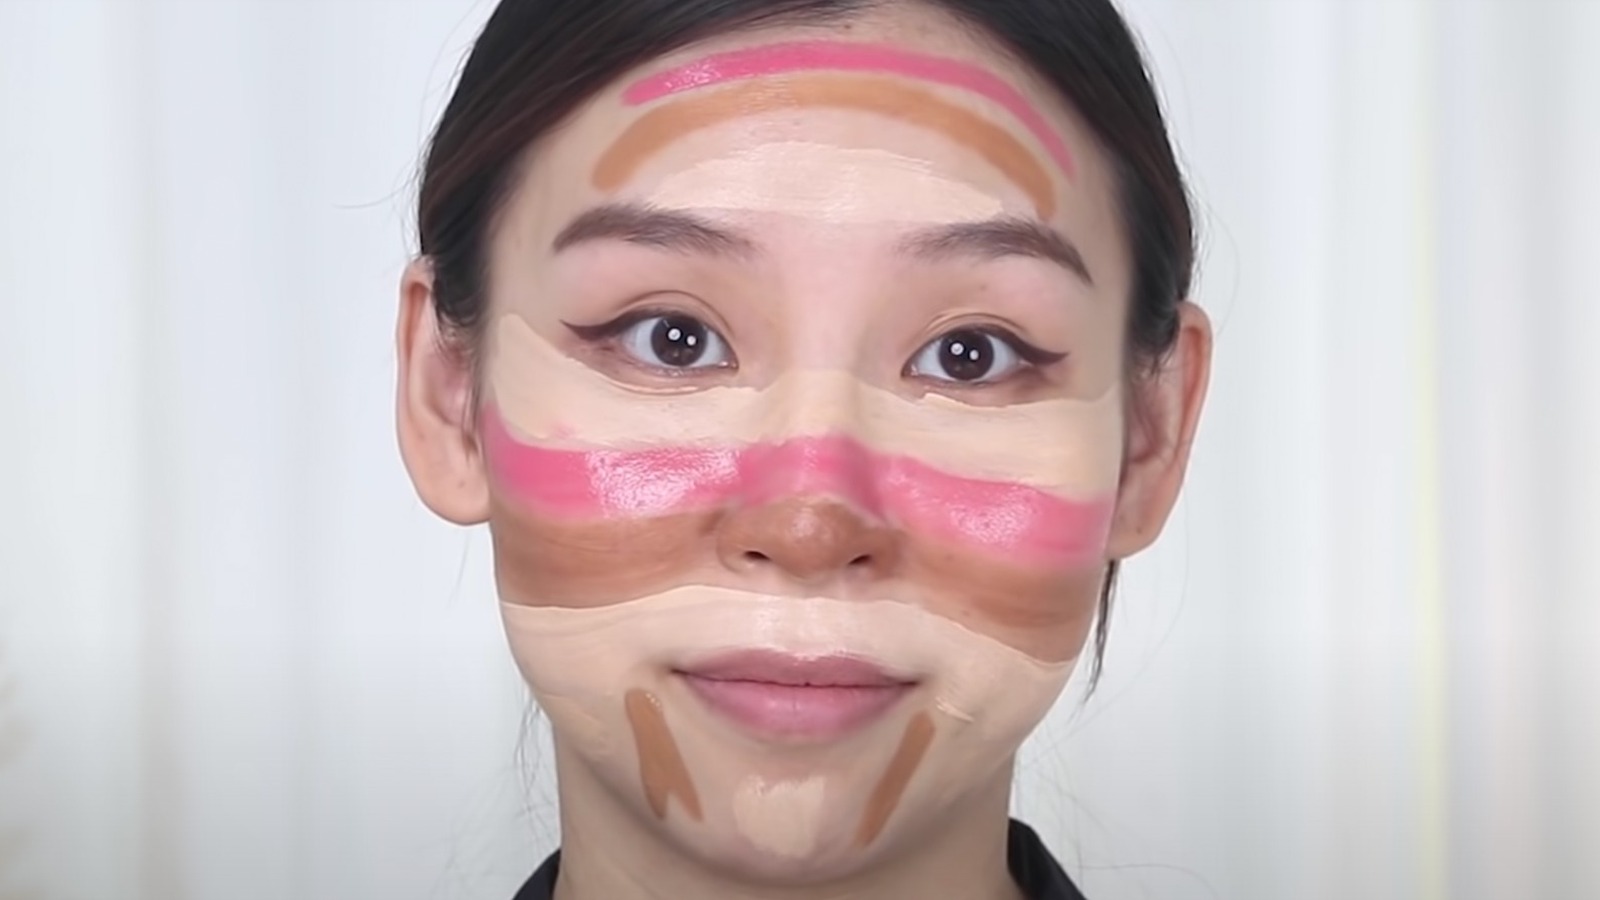 HOW TO CONTOUR ROUND FACE - Hacks, Tips & Tricks for Beginners! 